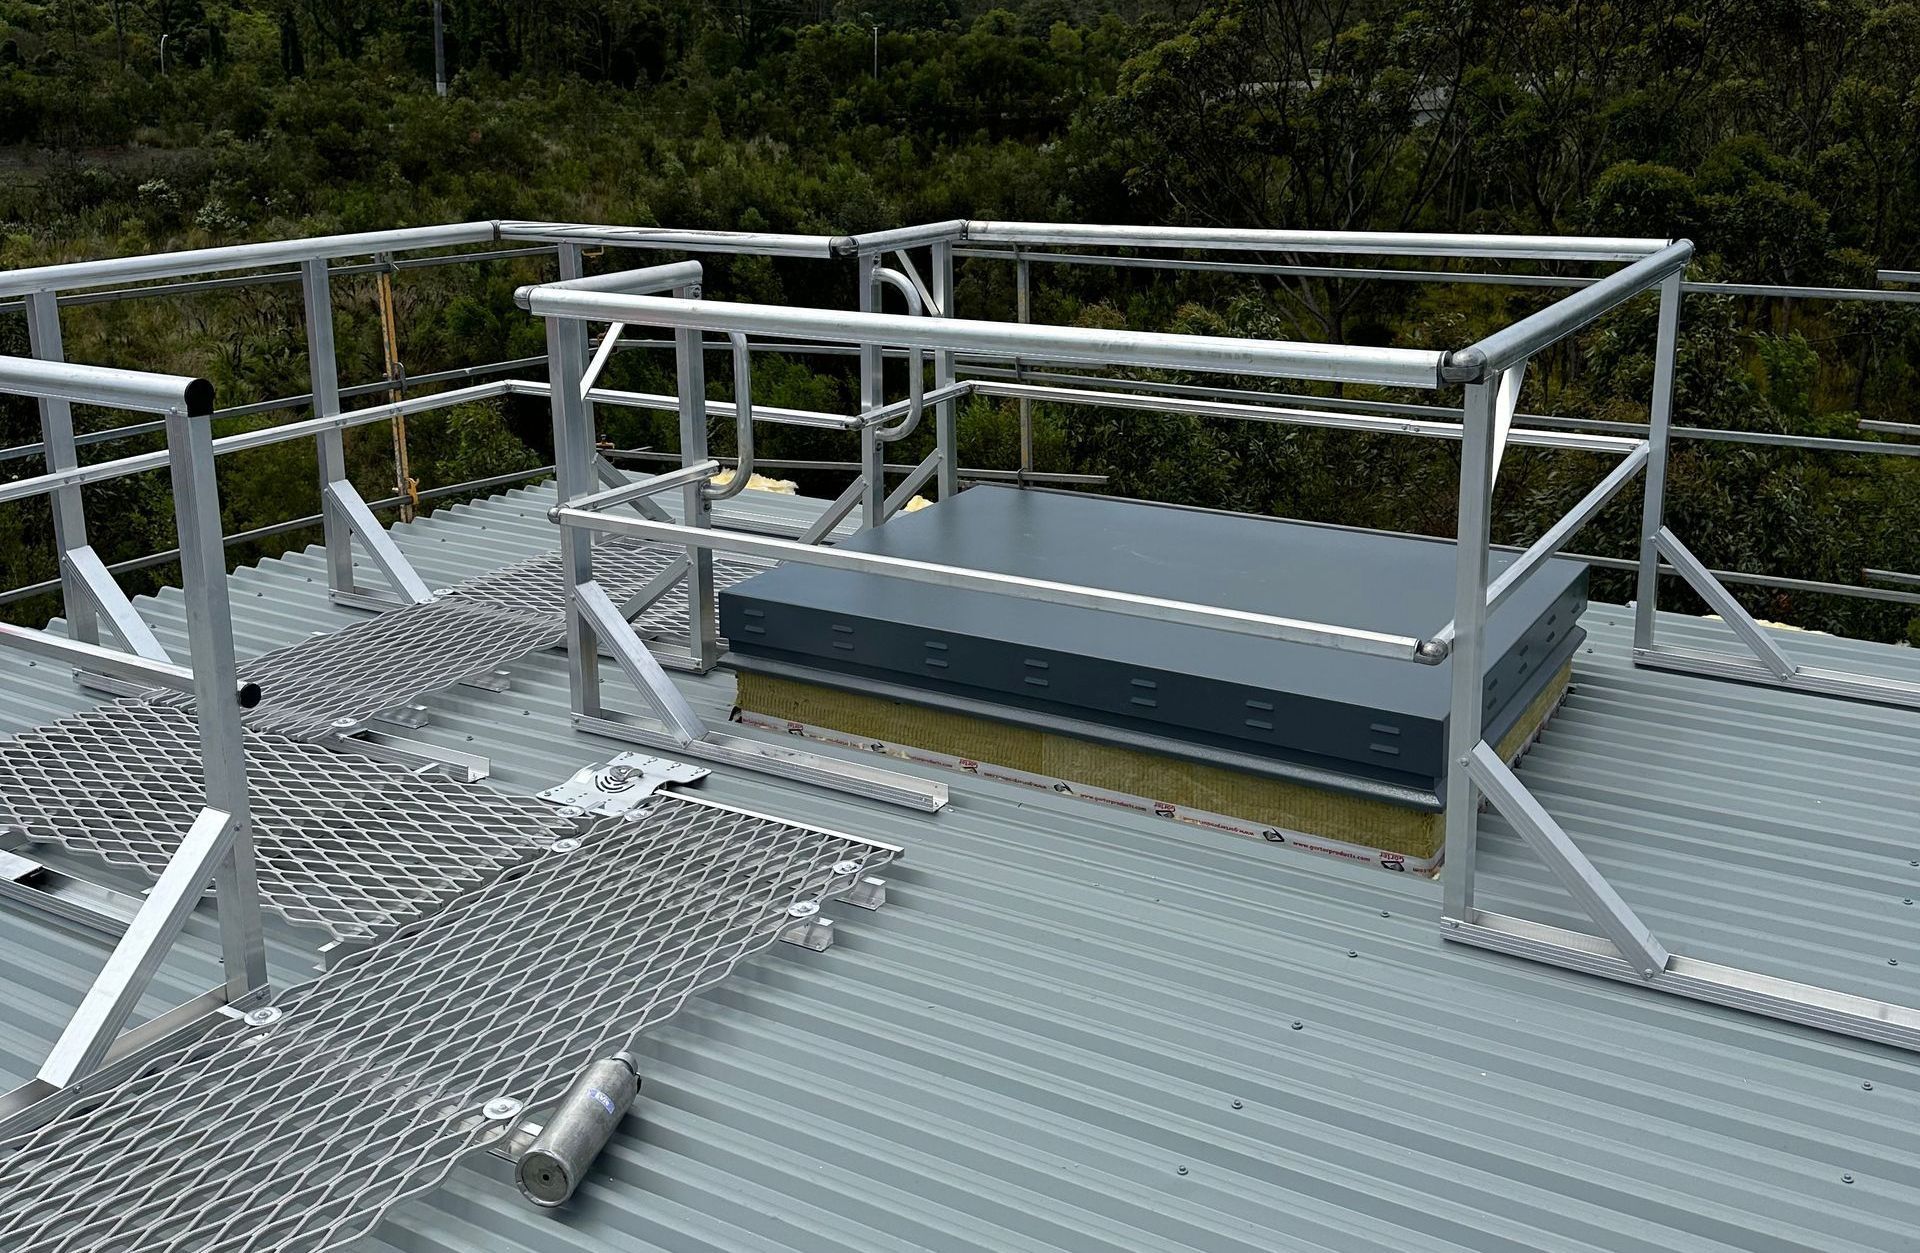 Anchor Point — Roof Safety Systems in Sandgate, NSW